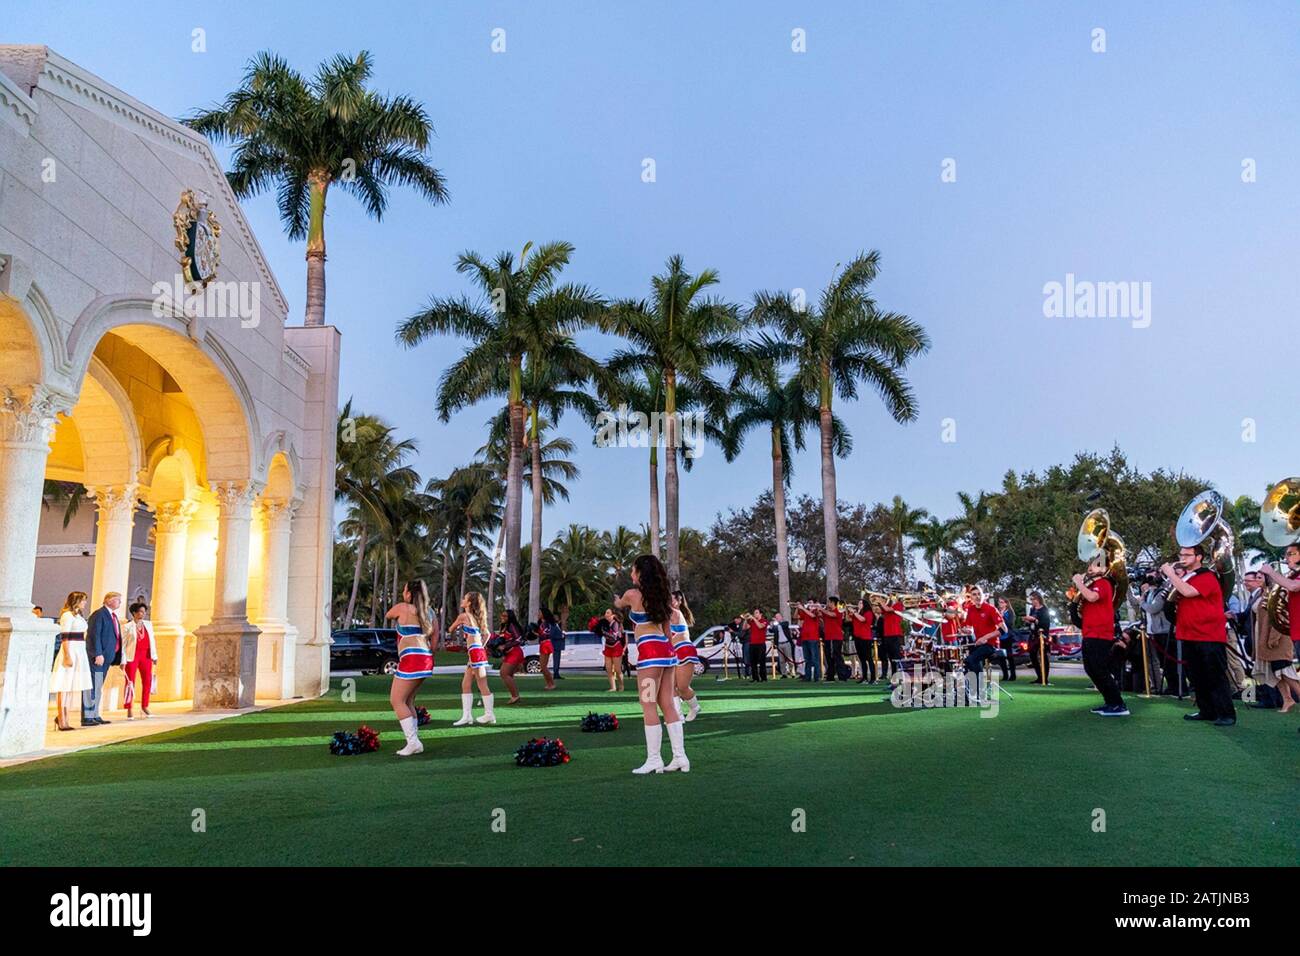 West Palm Beach, United States of America. 02 February, 2020. U.S President Donald Trump and First Lady Melania Trump are entertained by members of the Florida Atlantic University marching band prior to attending a Super Bowl party outside the Trump International Golf Club February 2, 2020 in West Palm Beach, Florida. Credit: Shealah Craighead/White House Photo/Alamy Live News Stock Photo